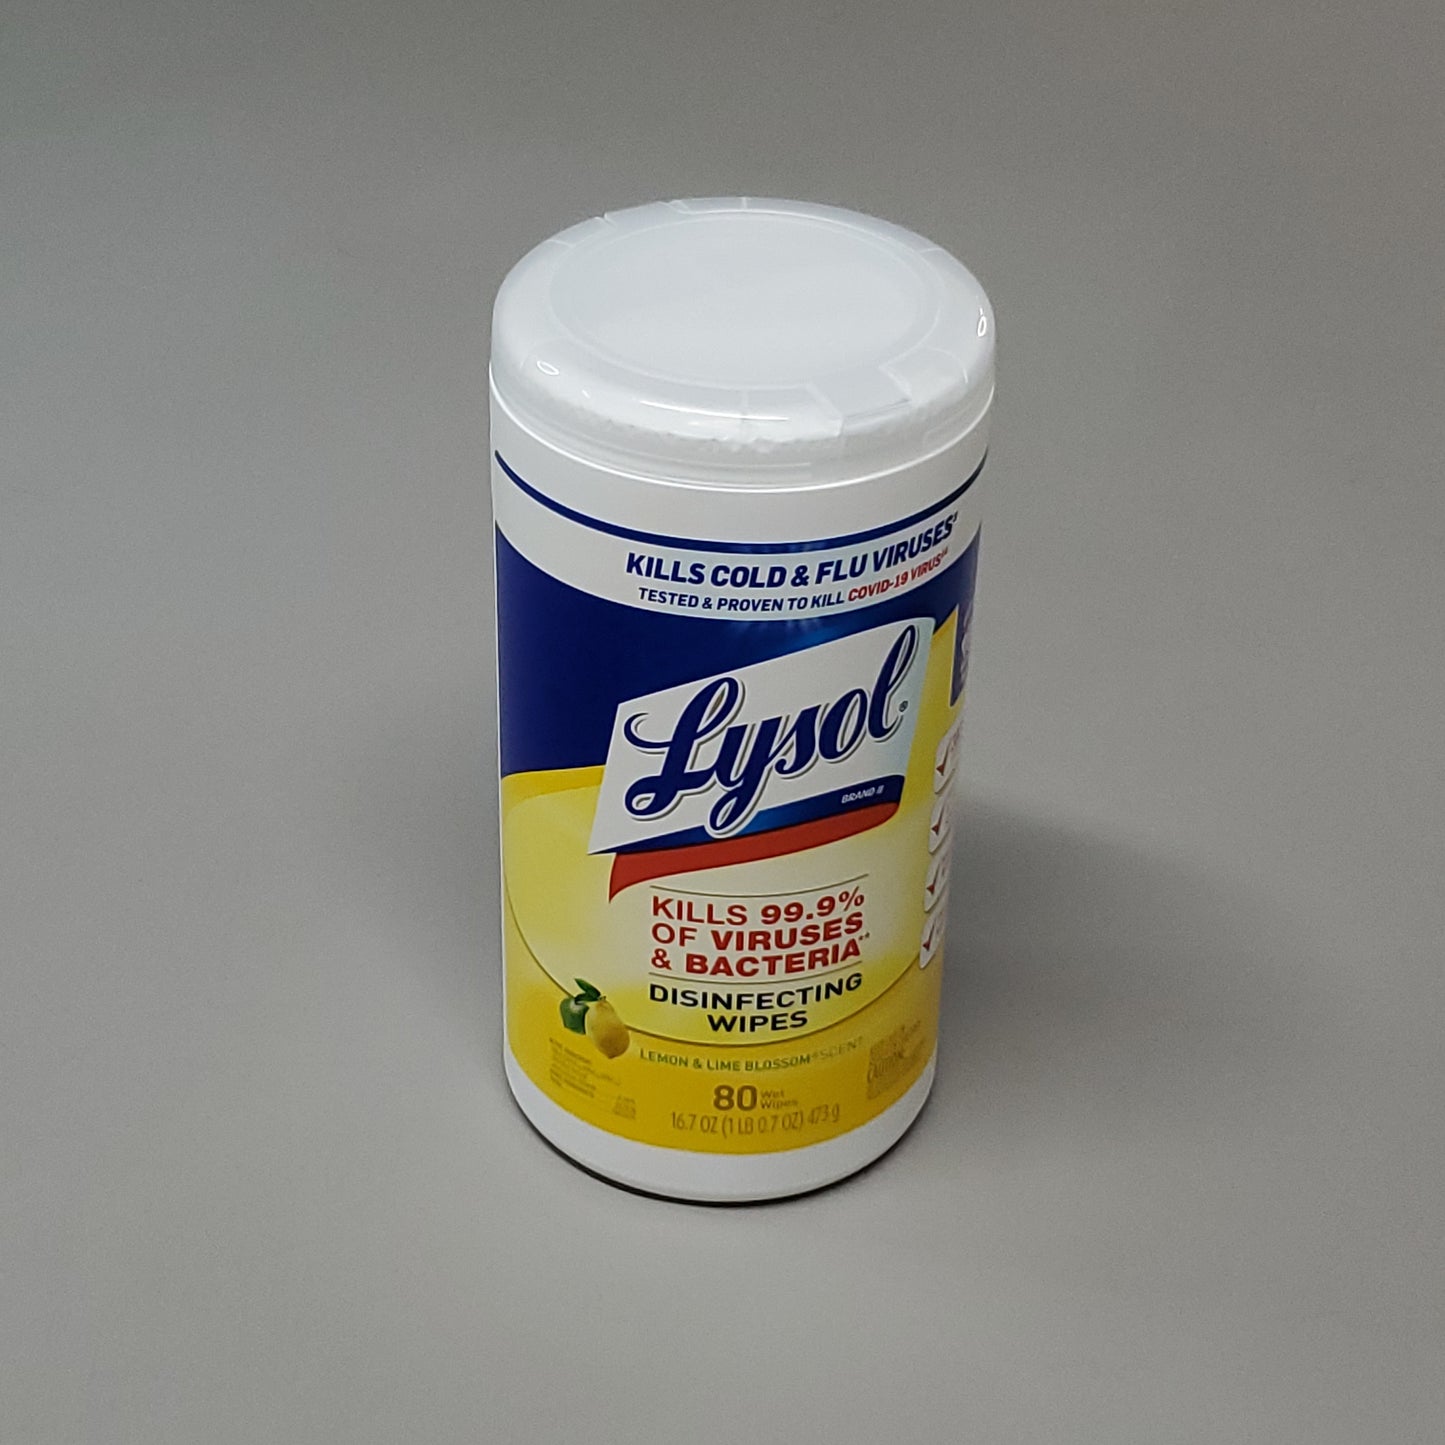 LYSOL 480 Disinfecting Wipes 6X80 Canister Packs Lemon & Lime Blossom Scent (New)